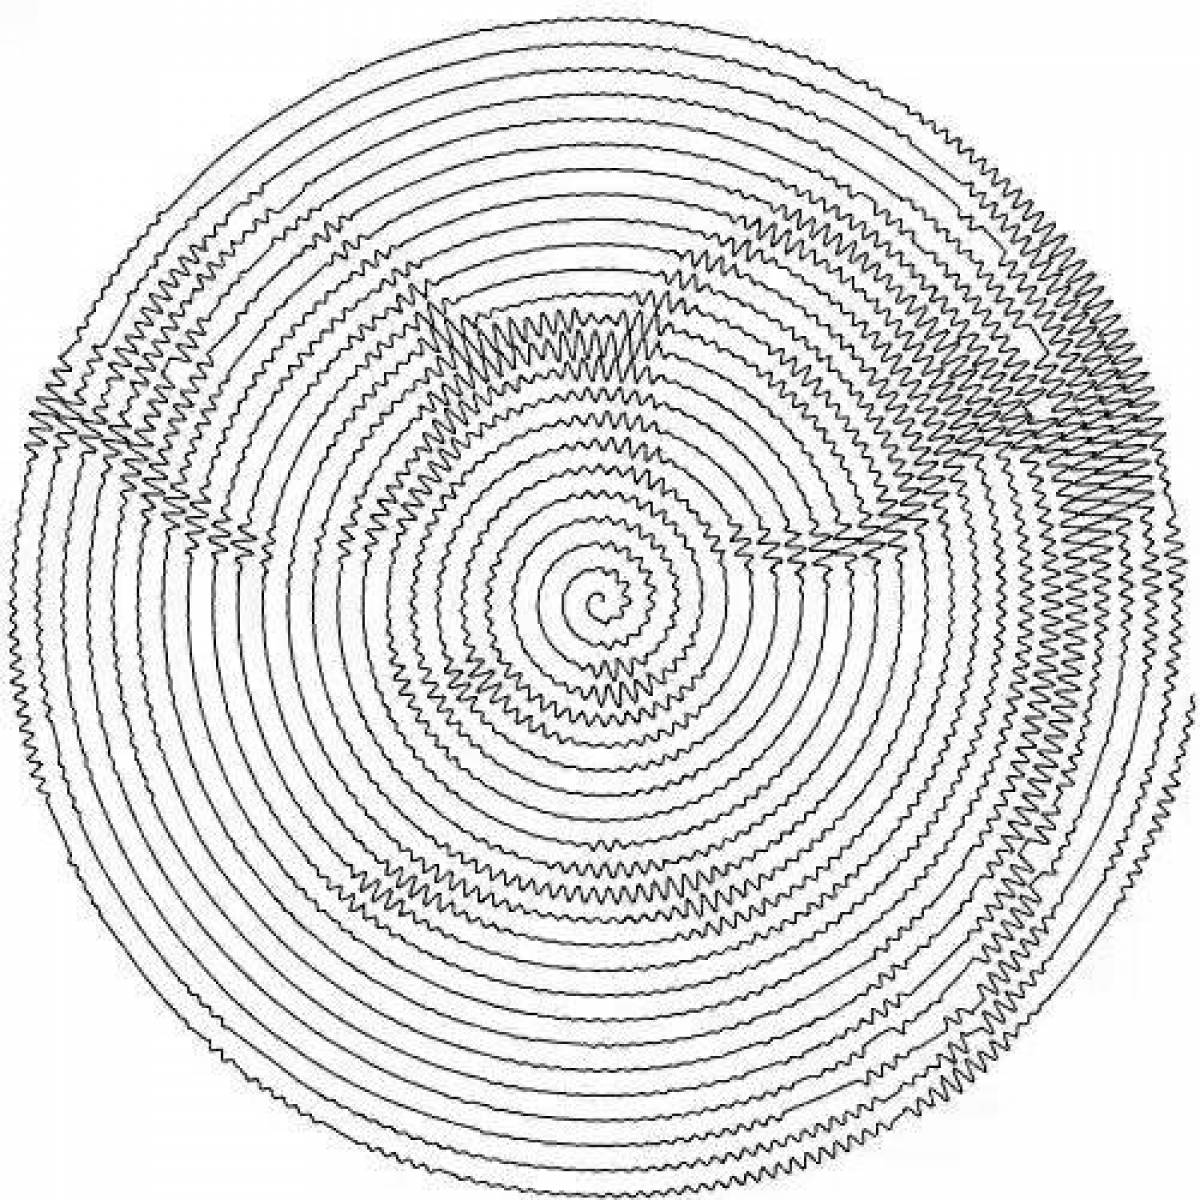 Amazing spiral create a coloring page